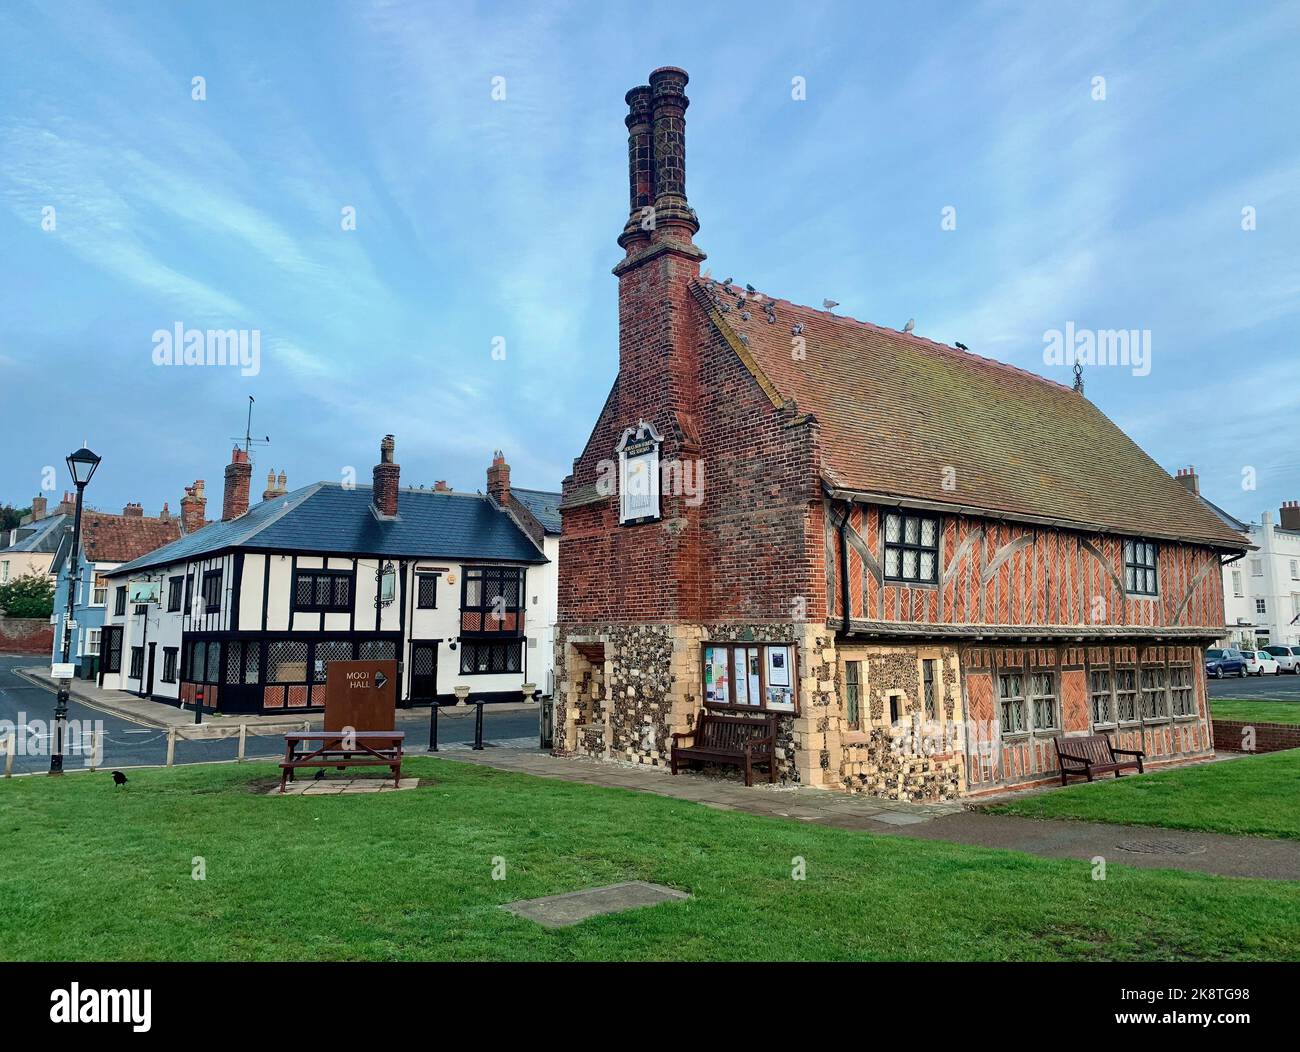 The historic Moot Hall buildings in Aldeburgh, Suffolk, UK. Stock Photo